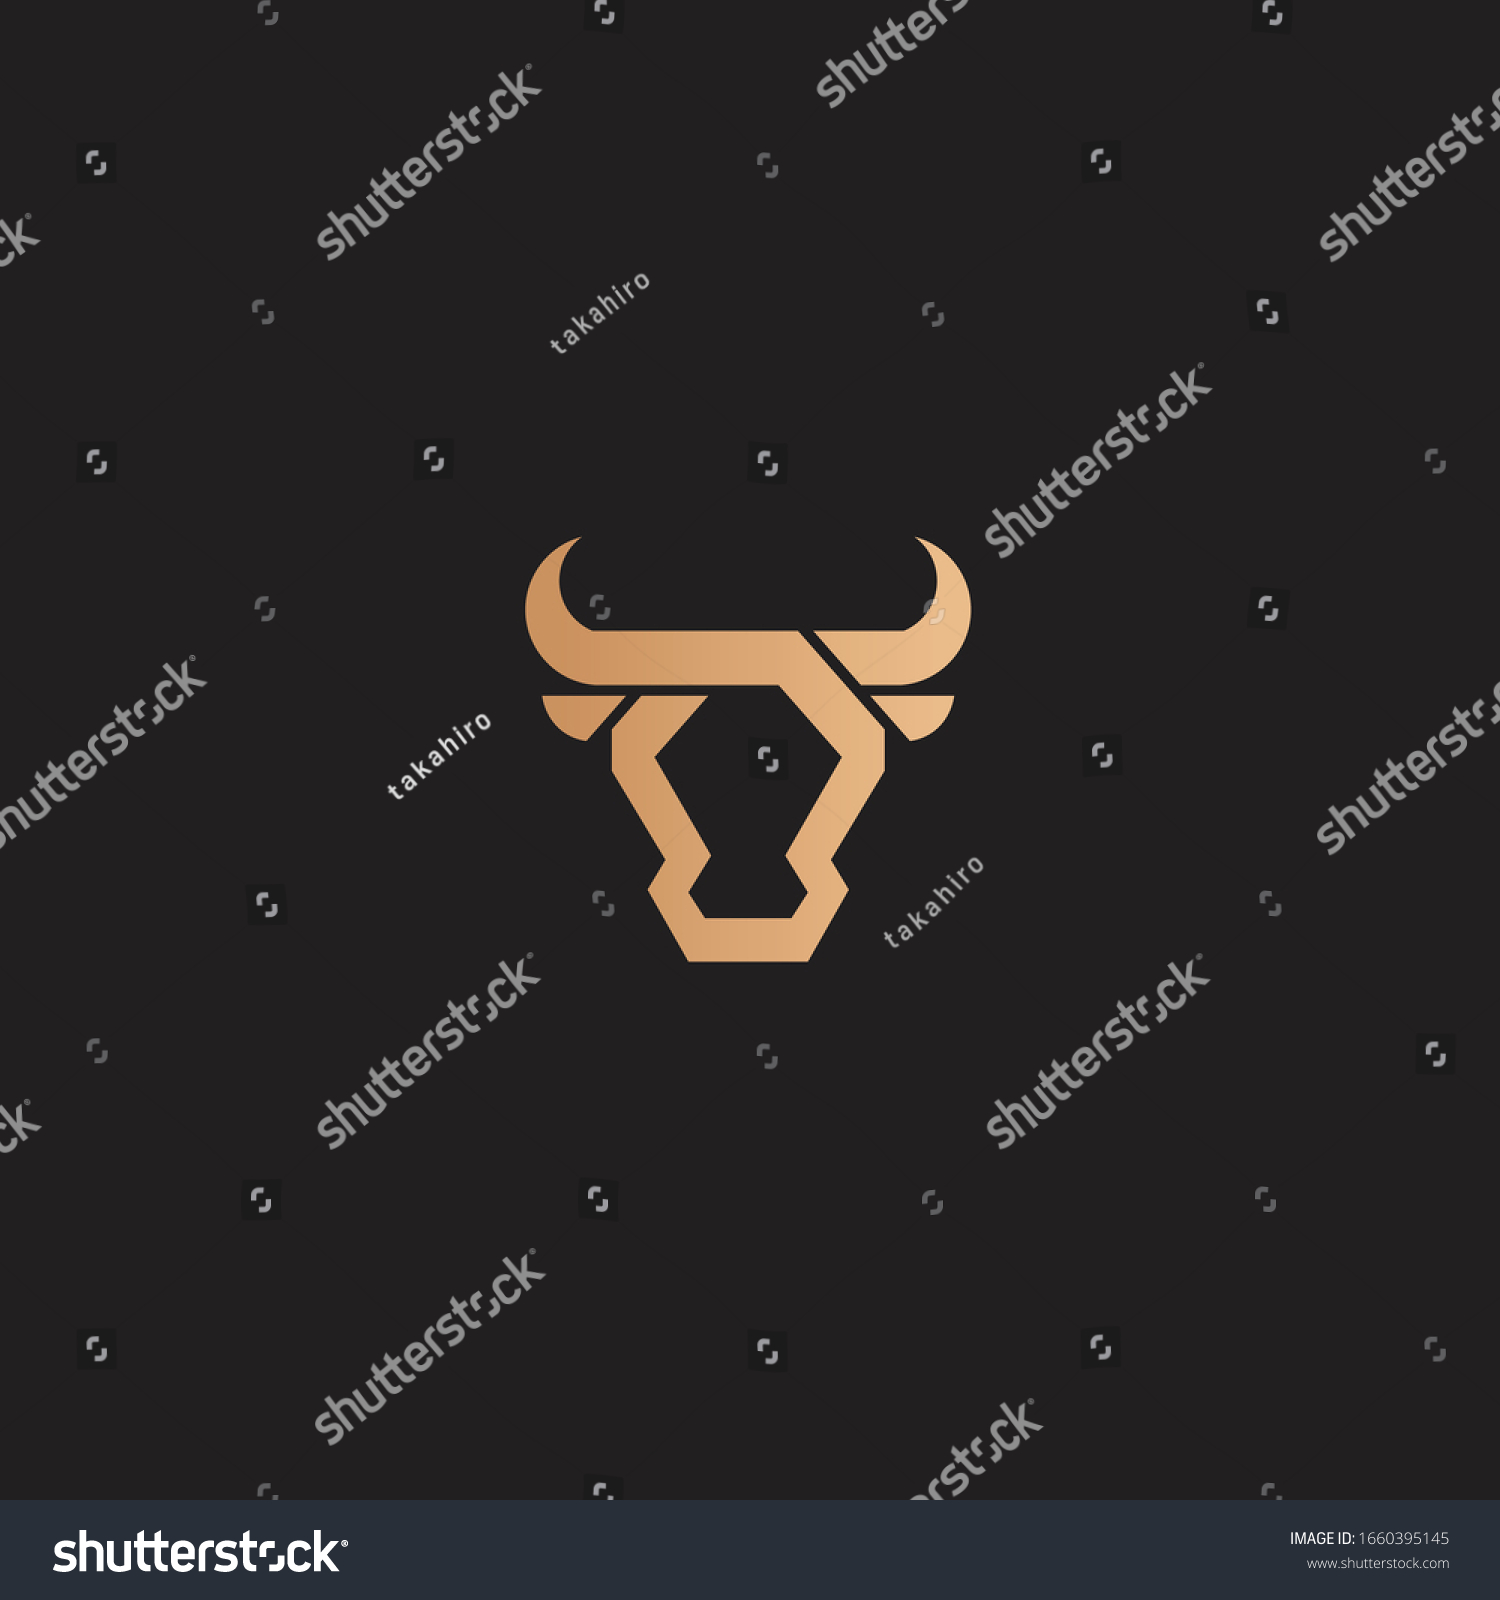 SVG of Bull, Cow, Angus, Cattle Head Vector Icon Logo Template svg